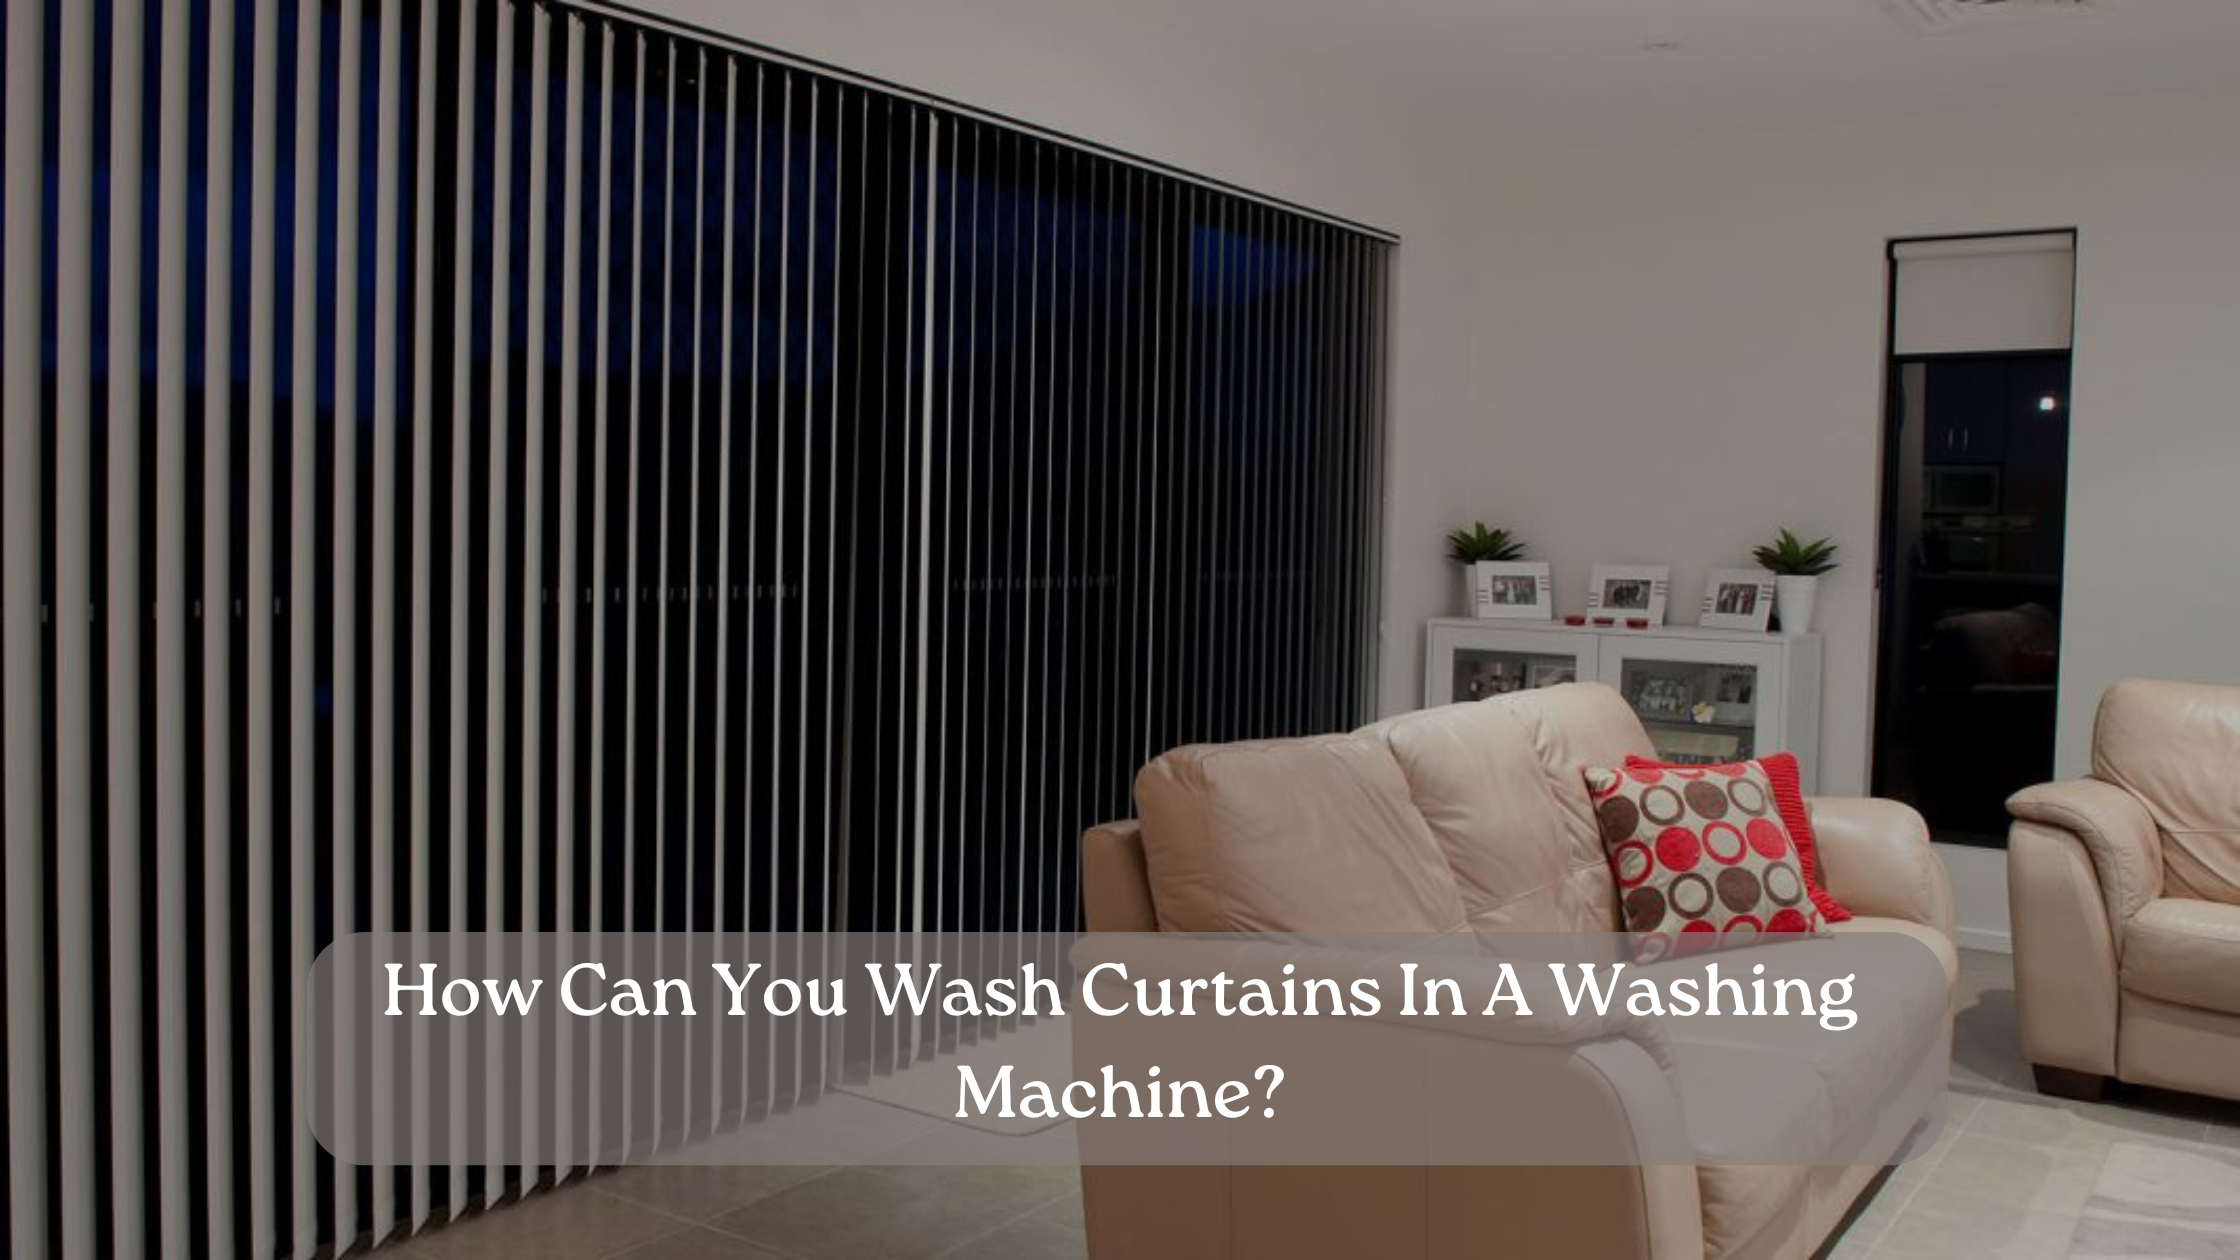 How Can You Wash Curtains In A Washing Machine?